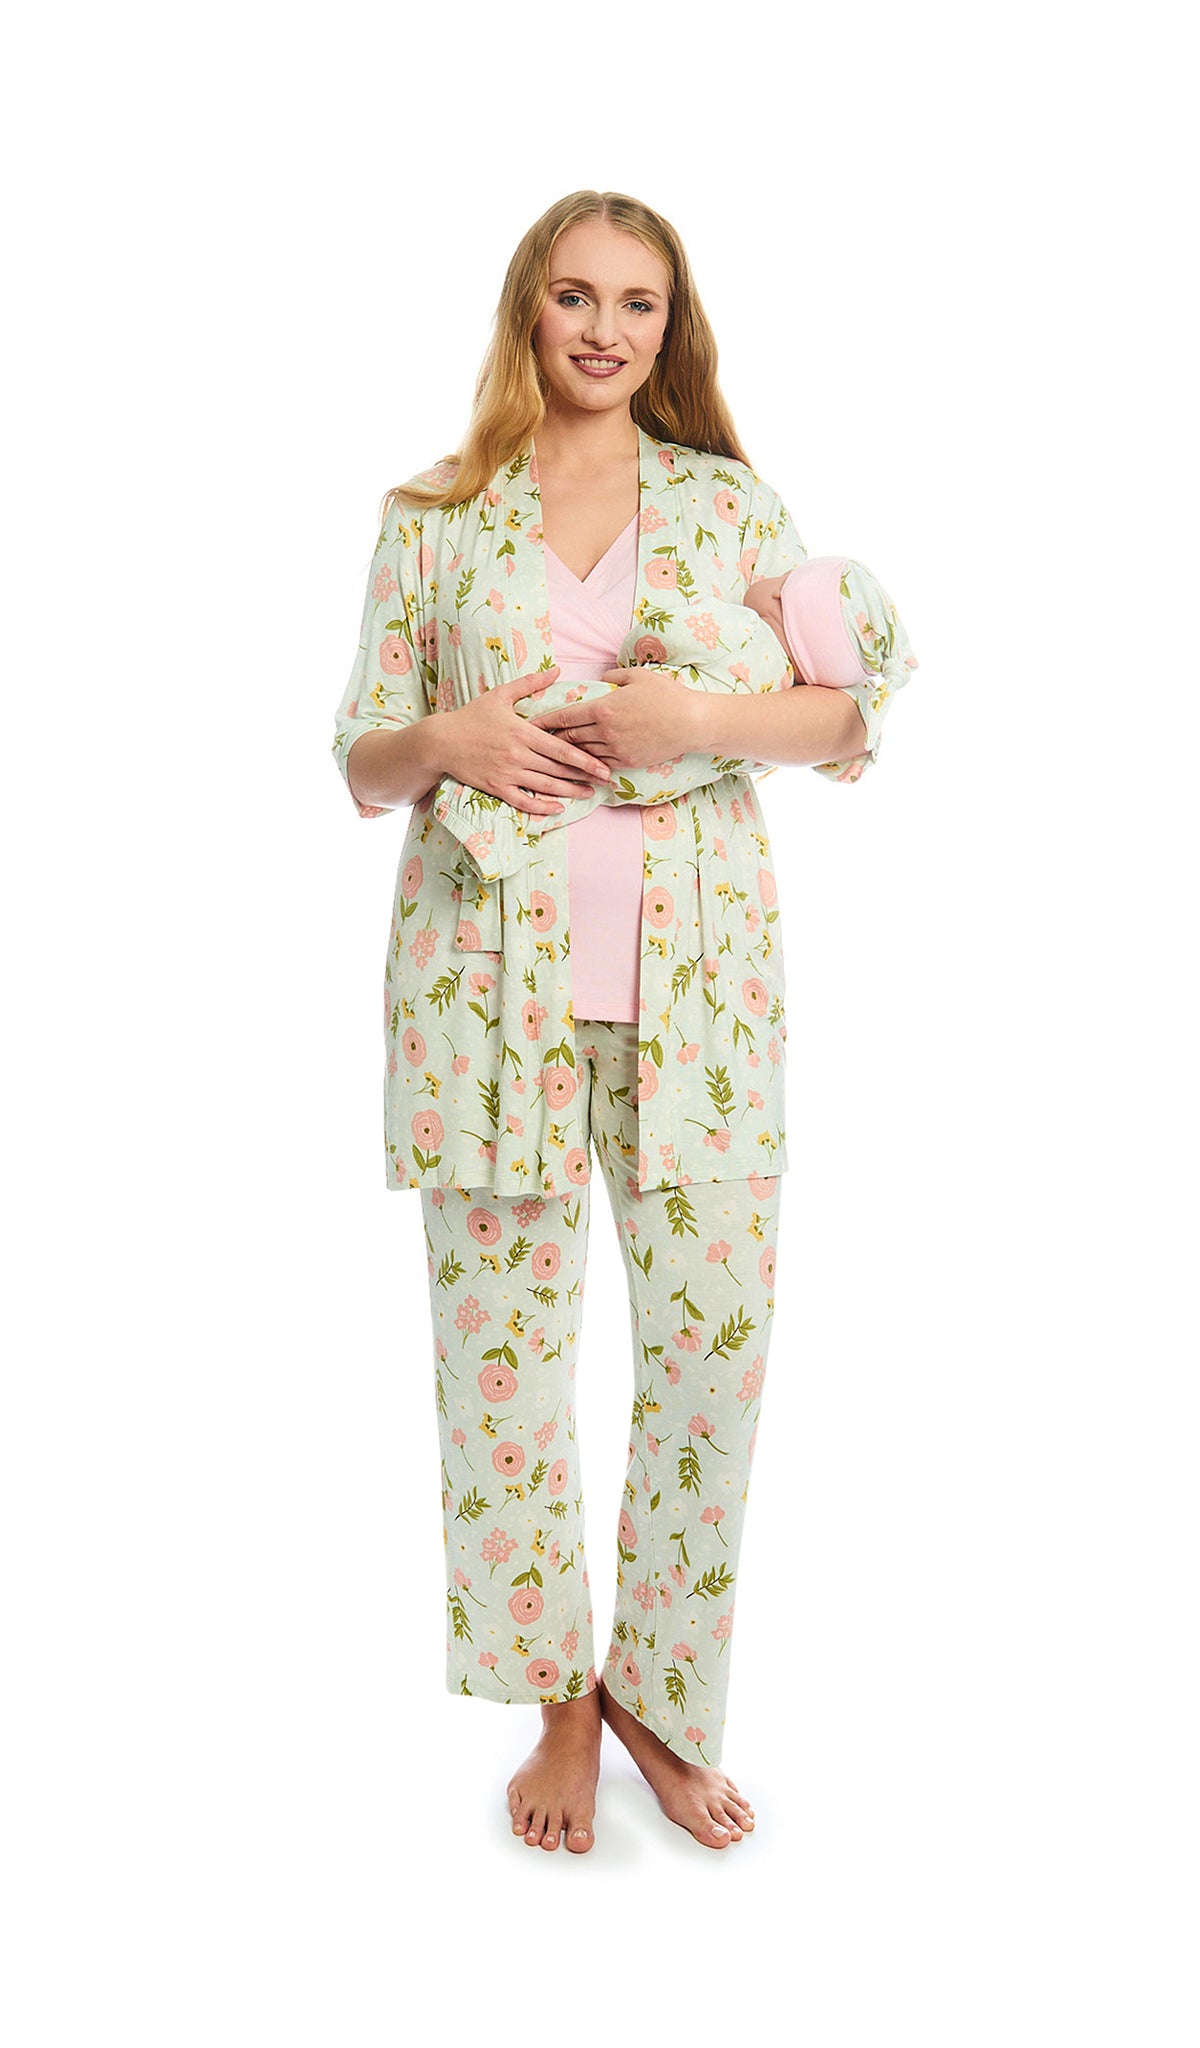 Carnation Analise 5-Piece Set. Woman wearing 3/4 sleeve robe, tank top and pant while holding a baby wearing baby gown and knotted baby hat.